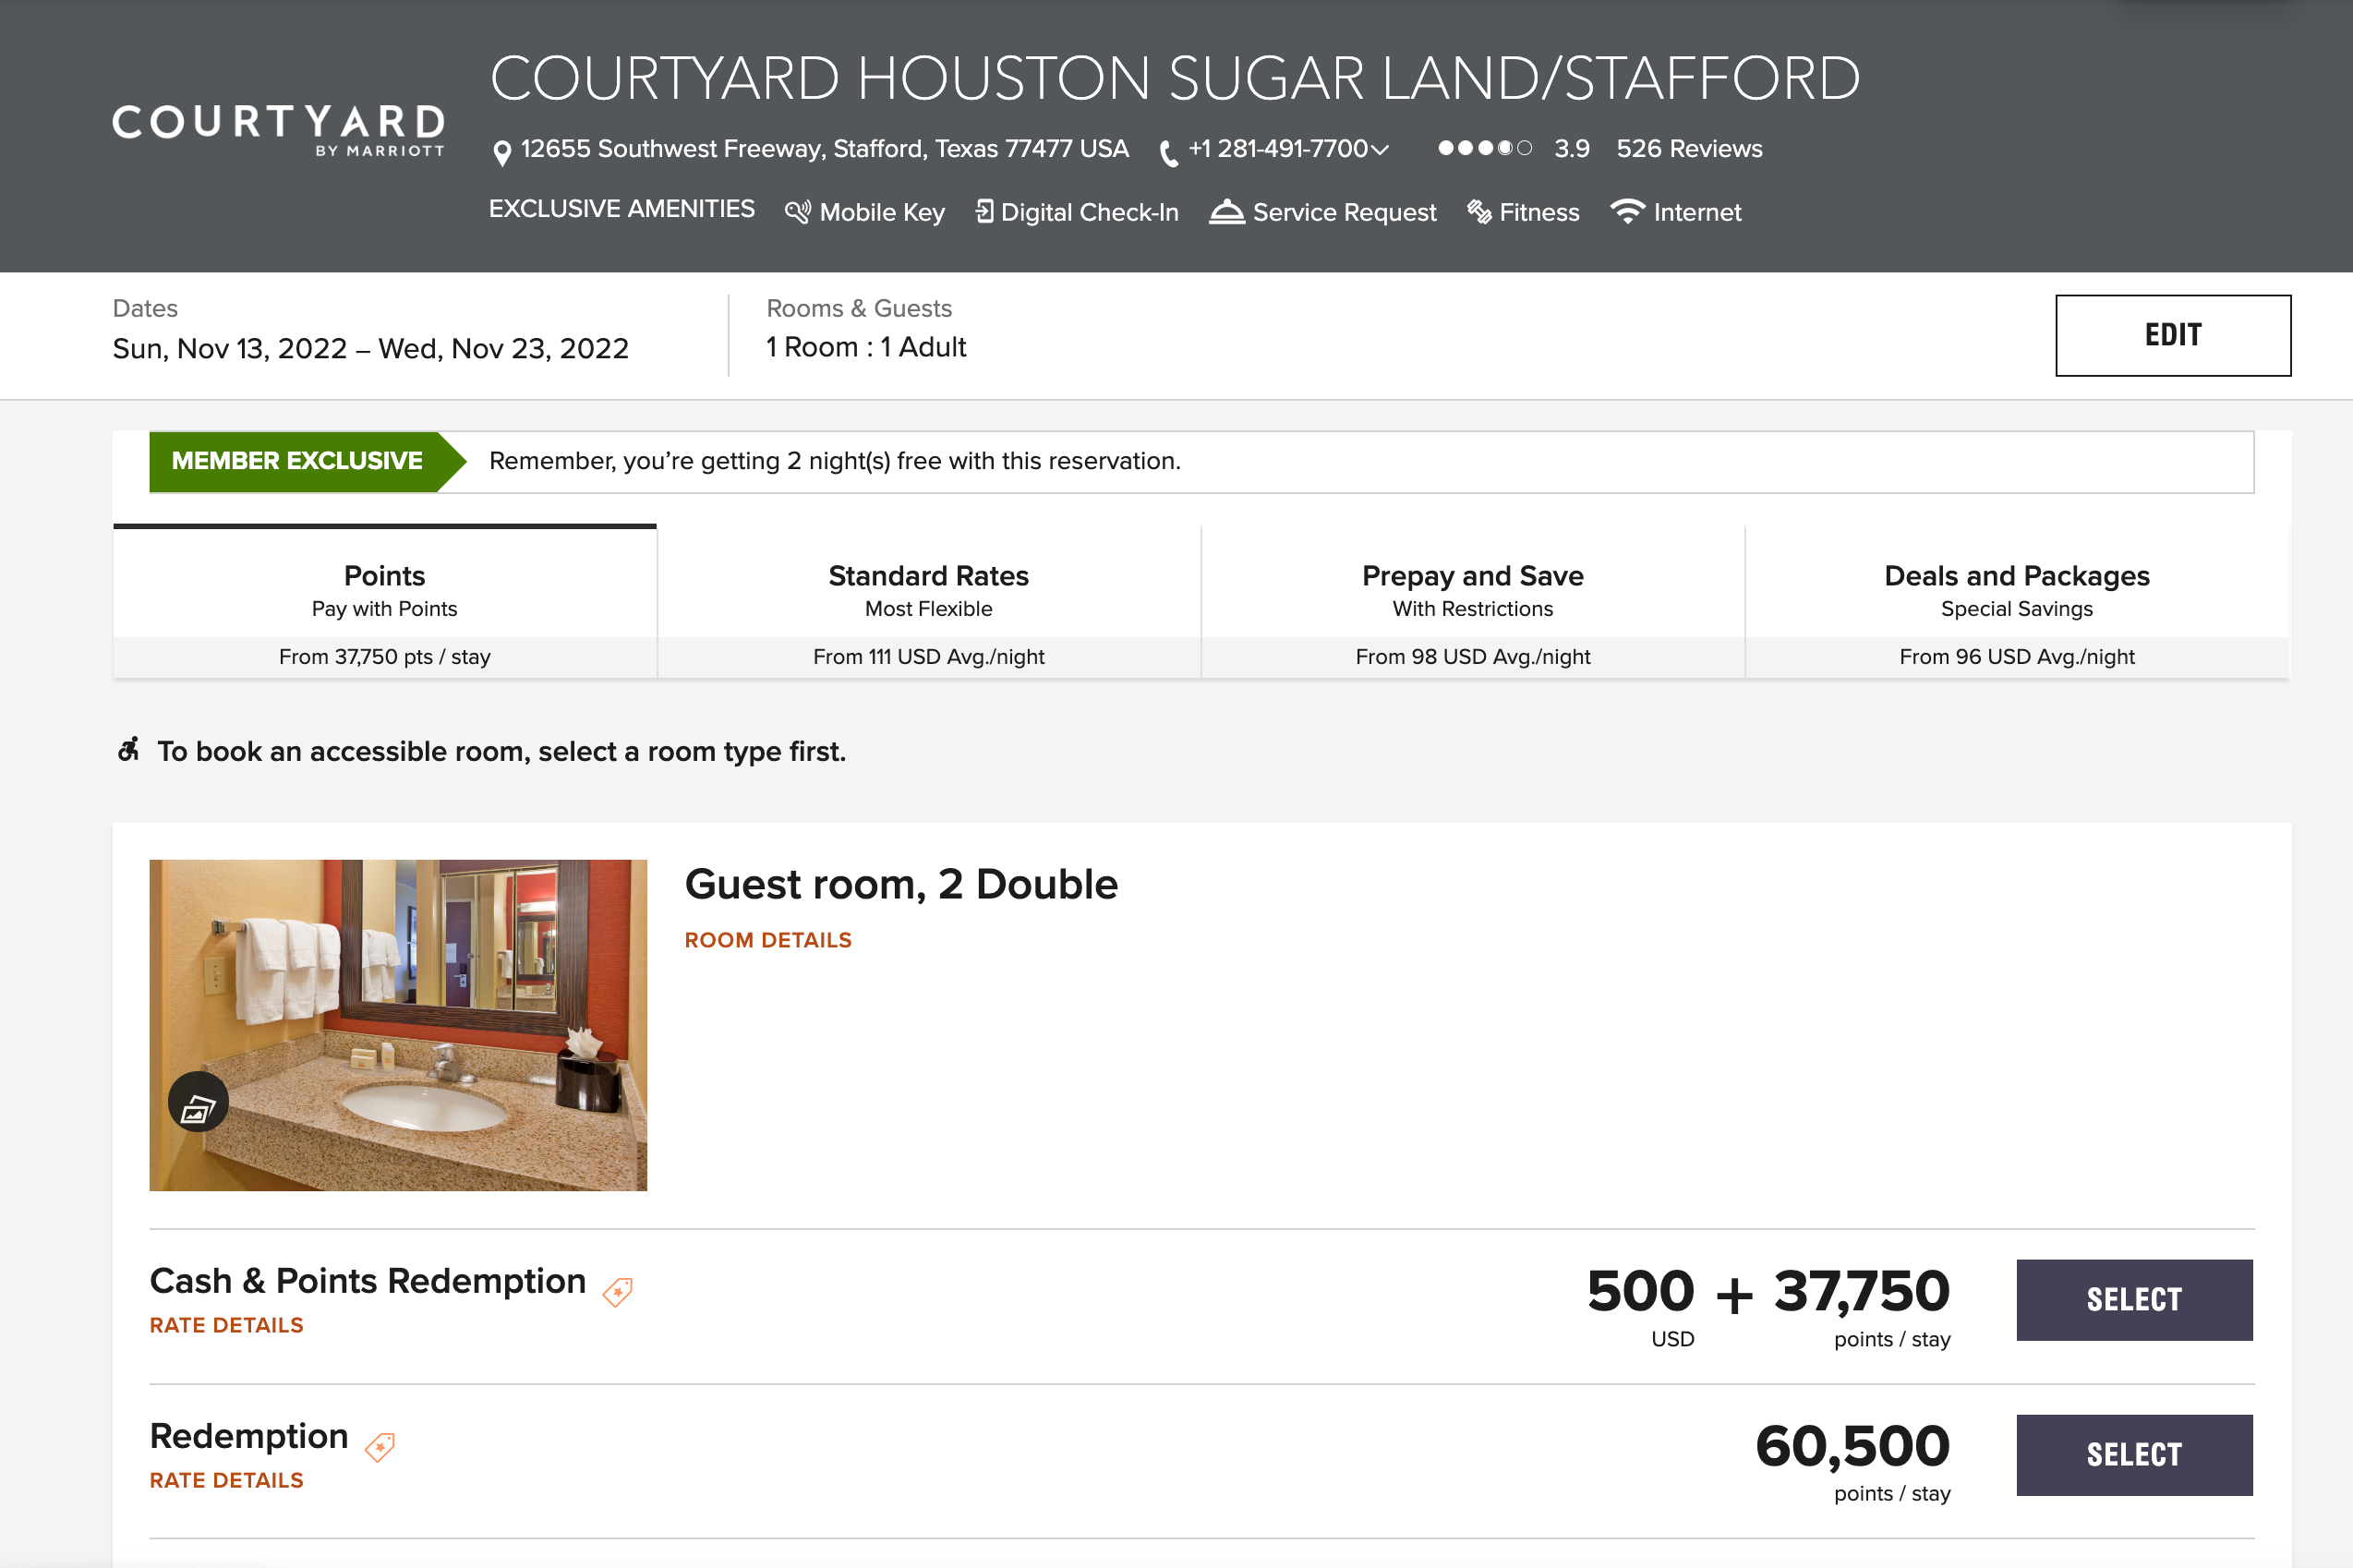 10 nights at the Courtyard by Marriott Houston Sugar Land:Stafford